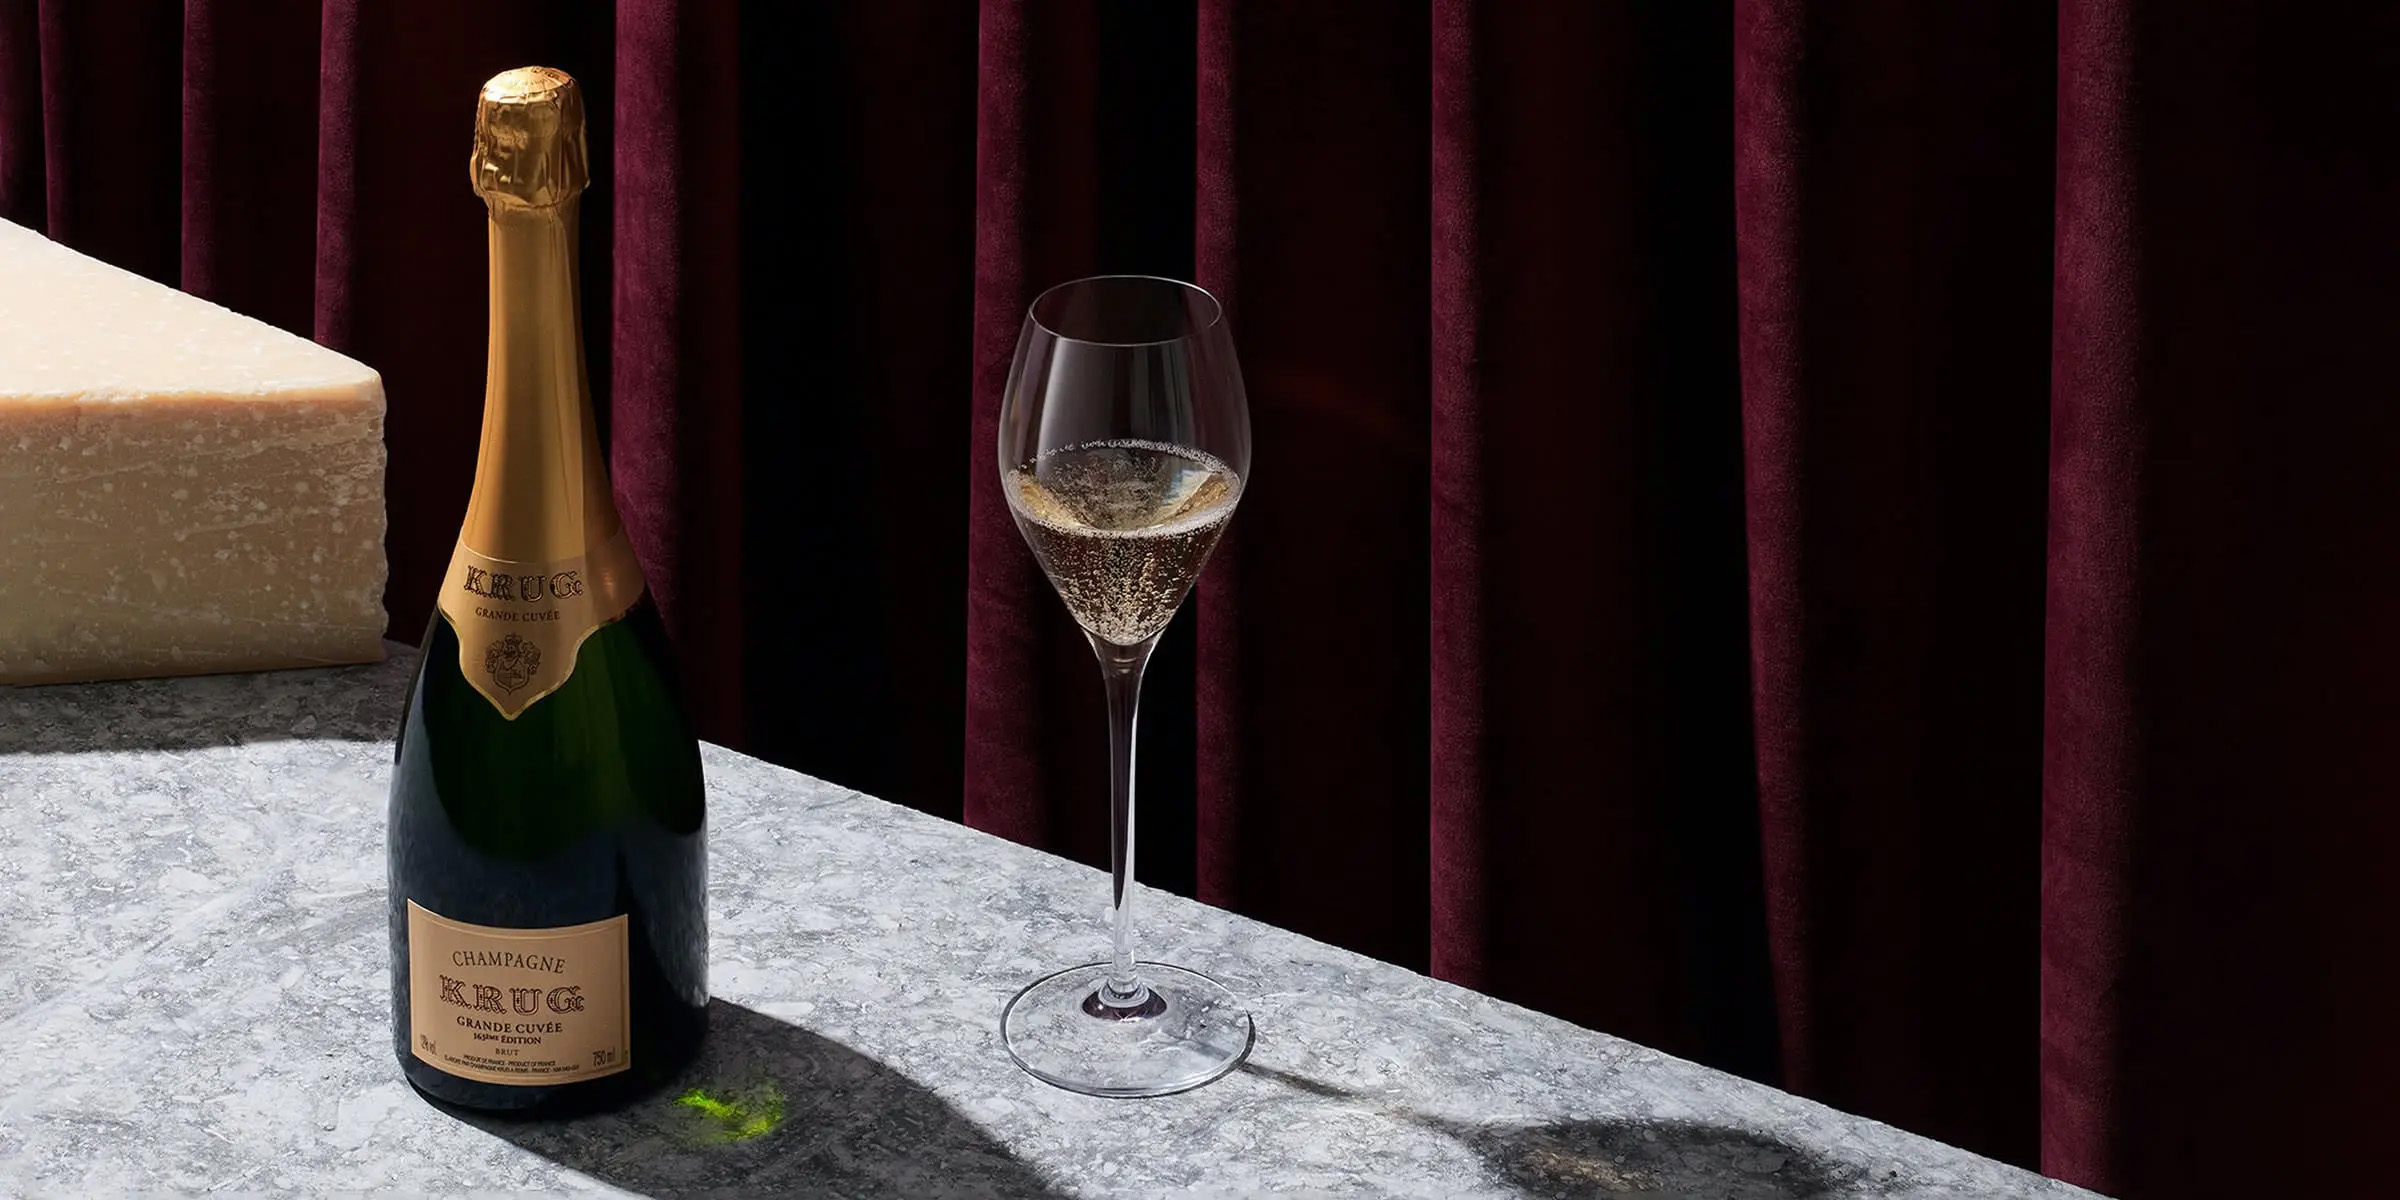 19 Best Champagne Brands: Find The Best Champagne For Your Occasion